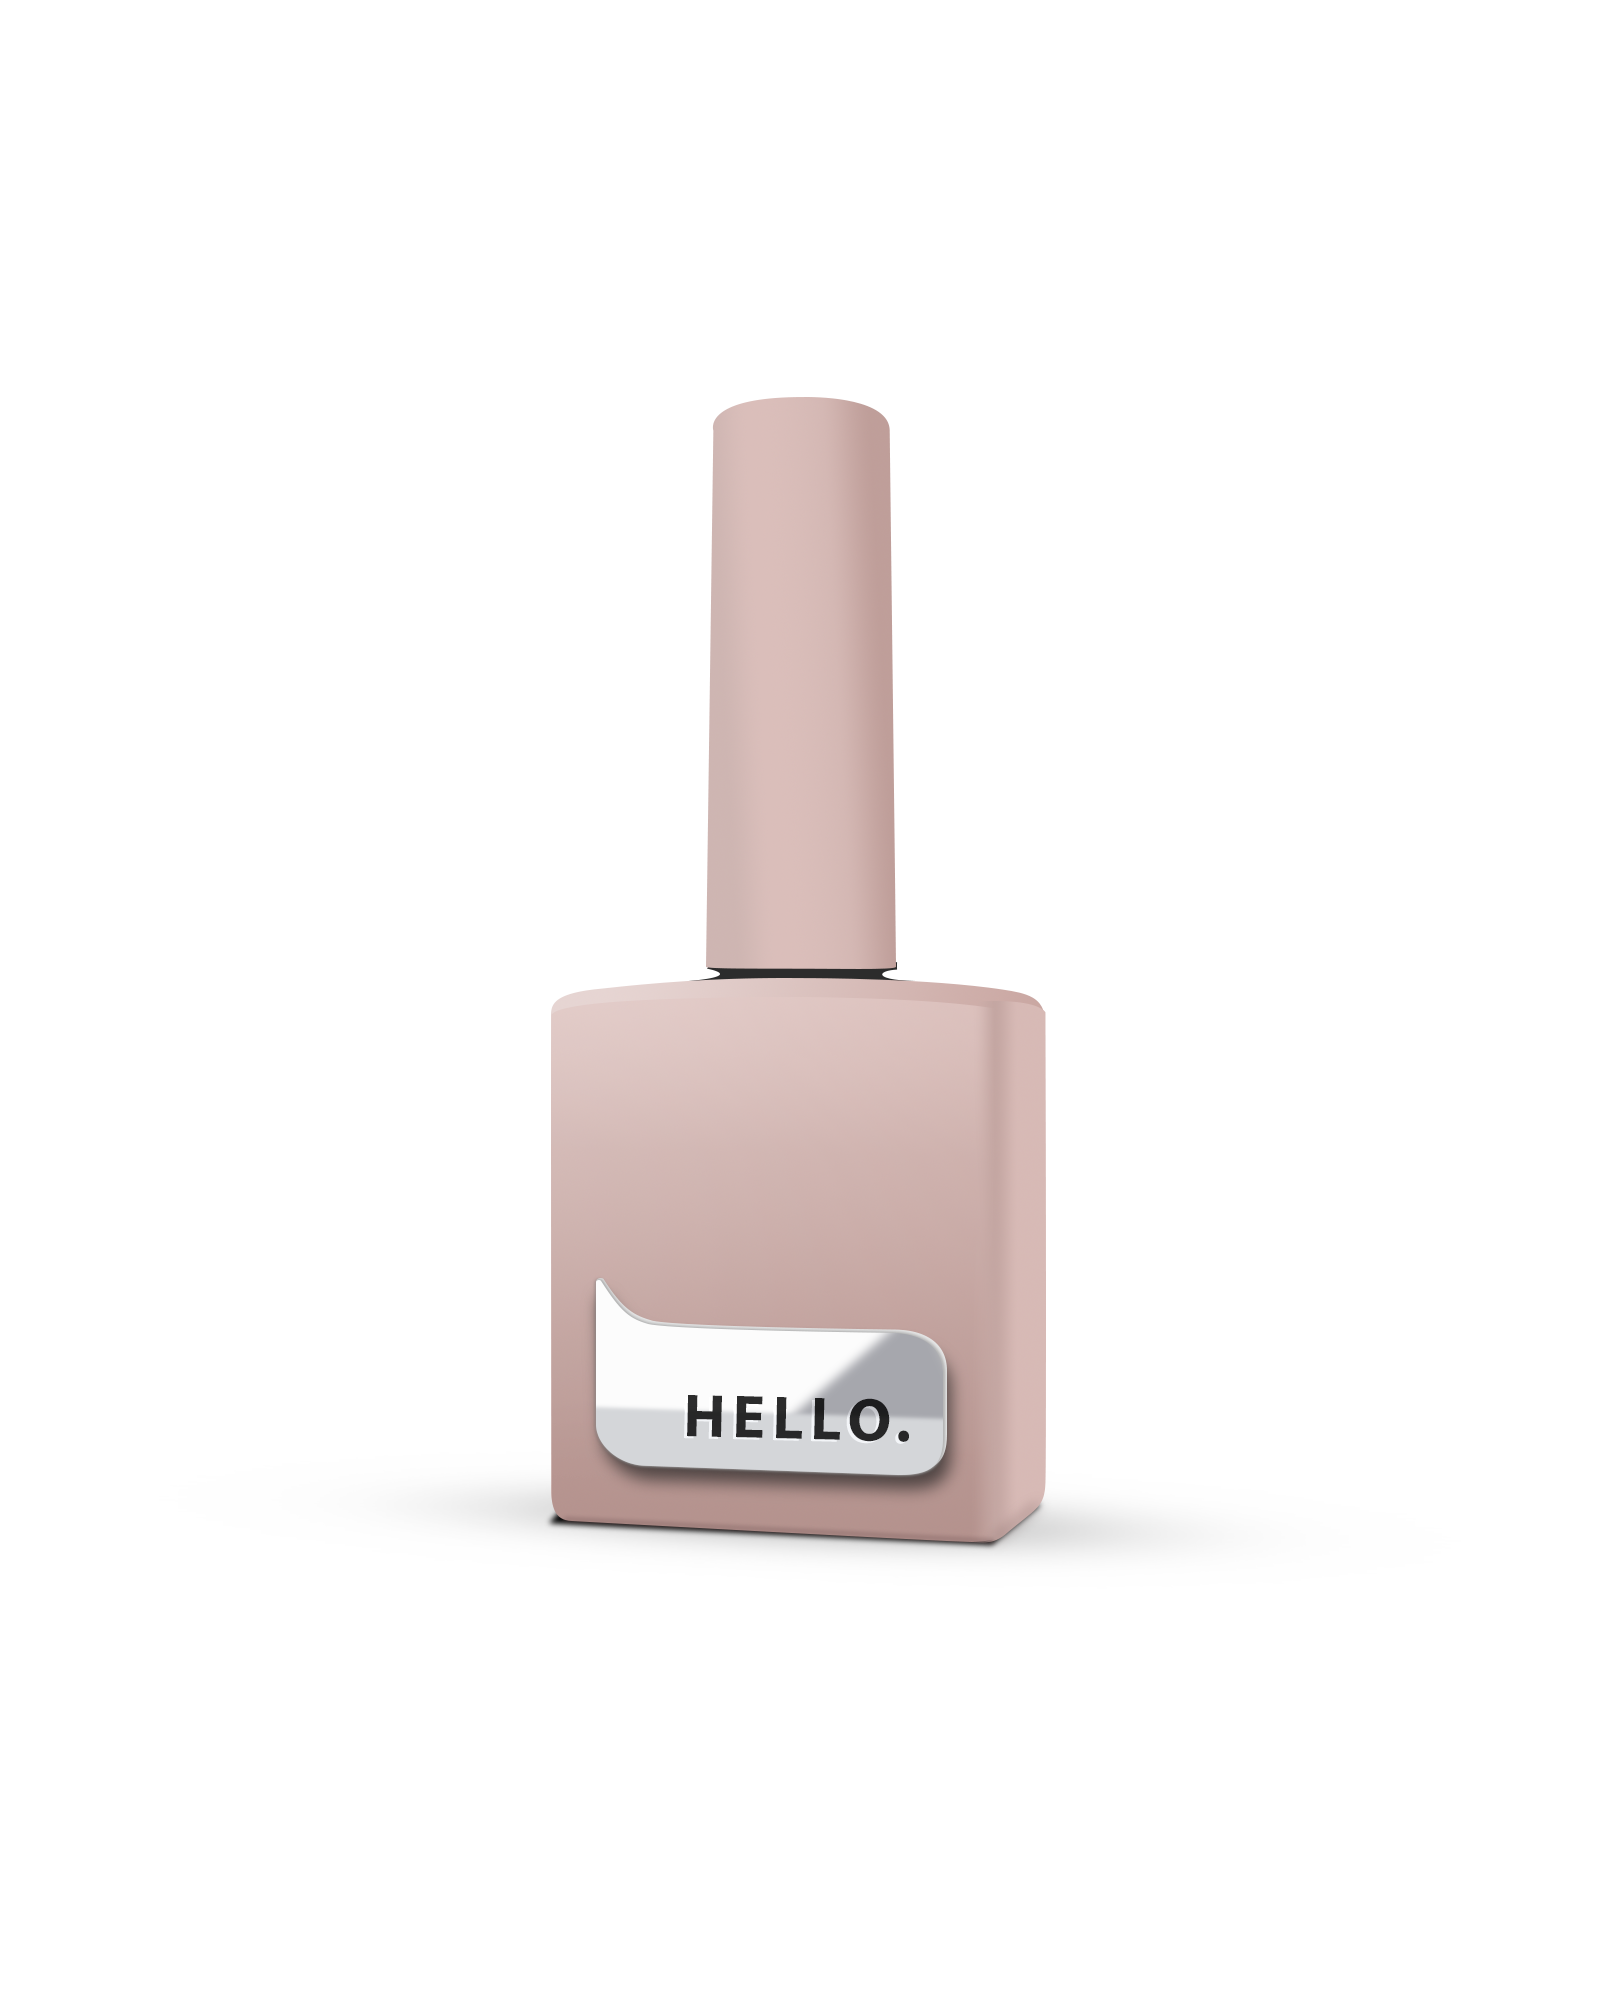 HELLO Tint base BLOSSOM. Color: Beige